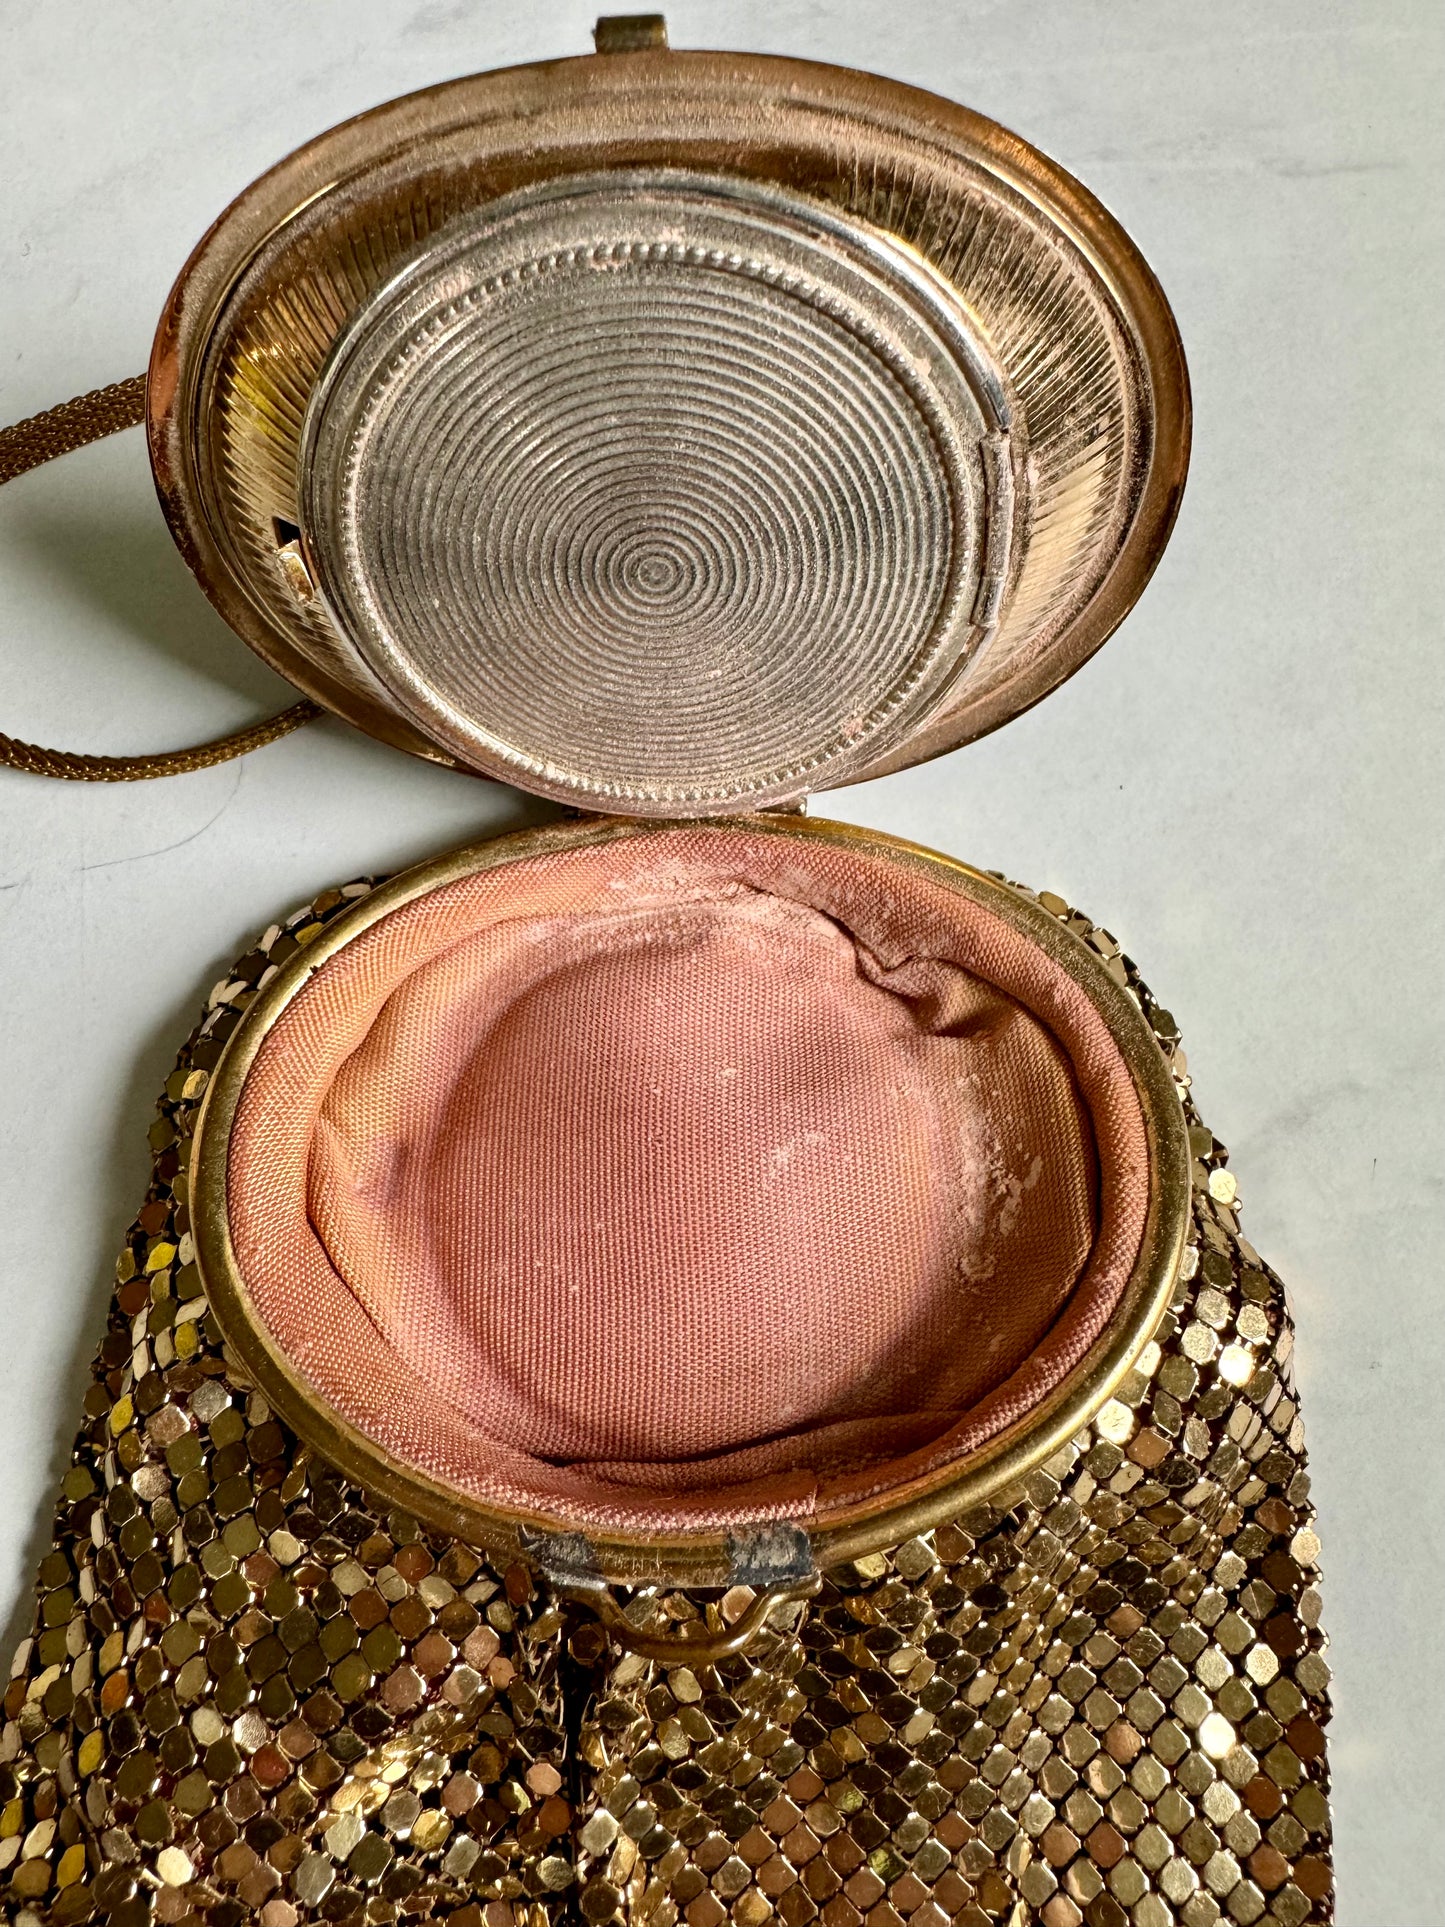 Stunning 1940's vintage mesh powder compact purse with enamel top